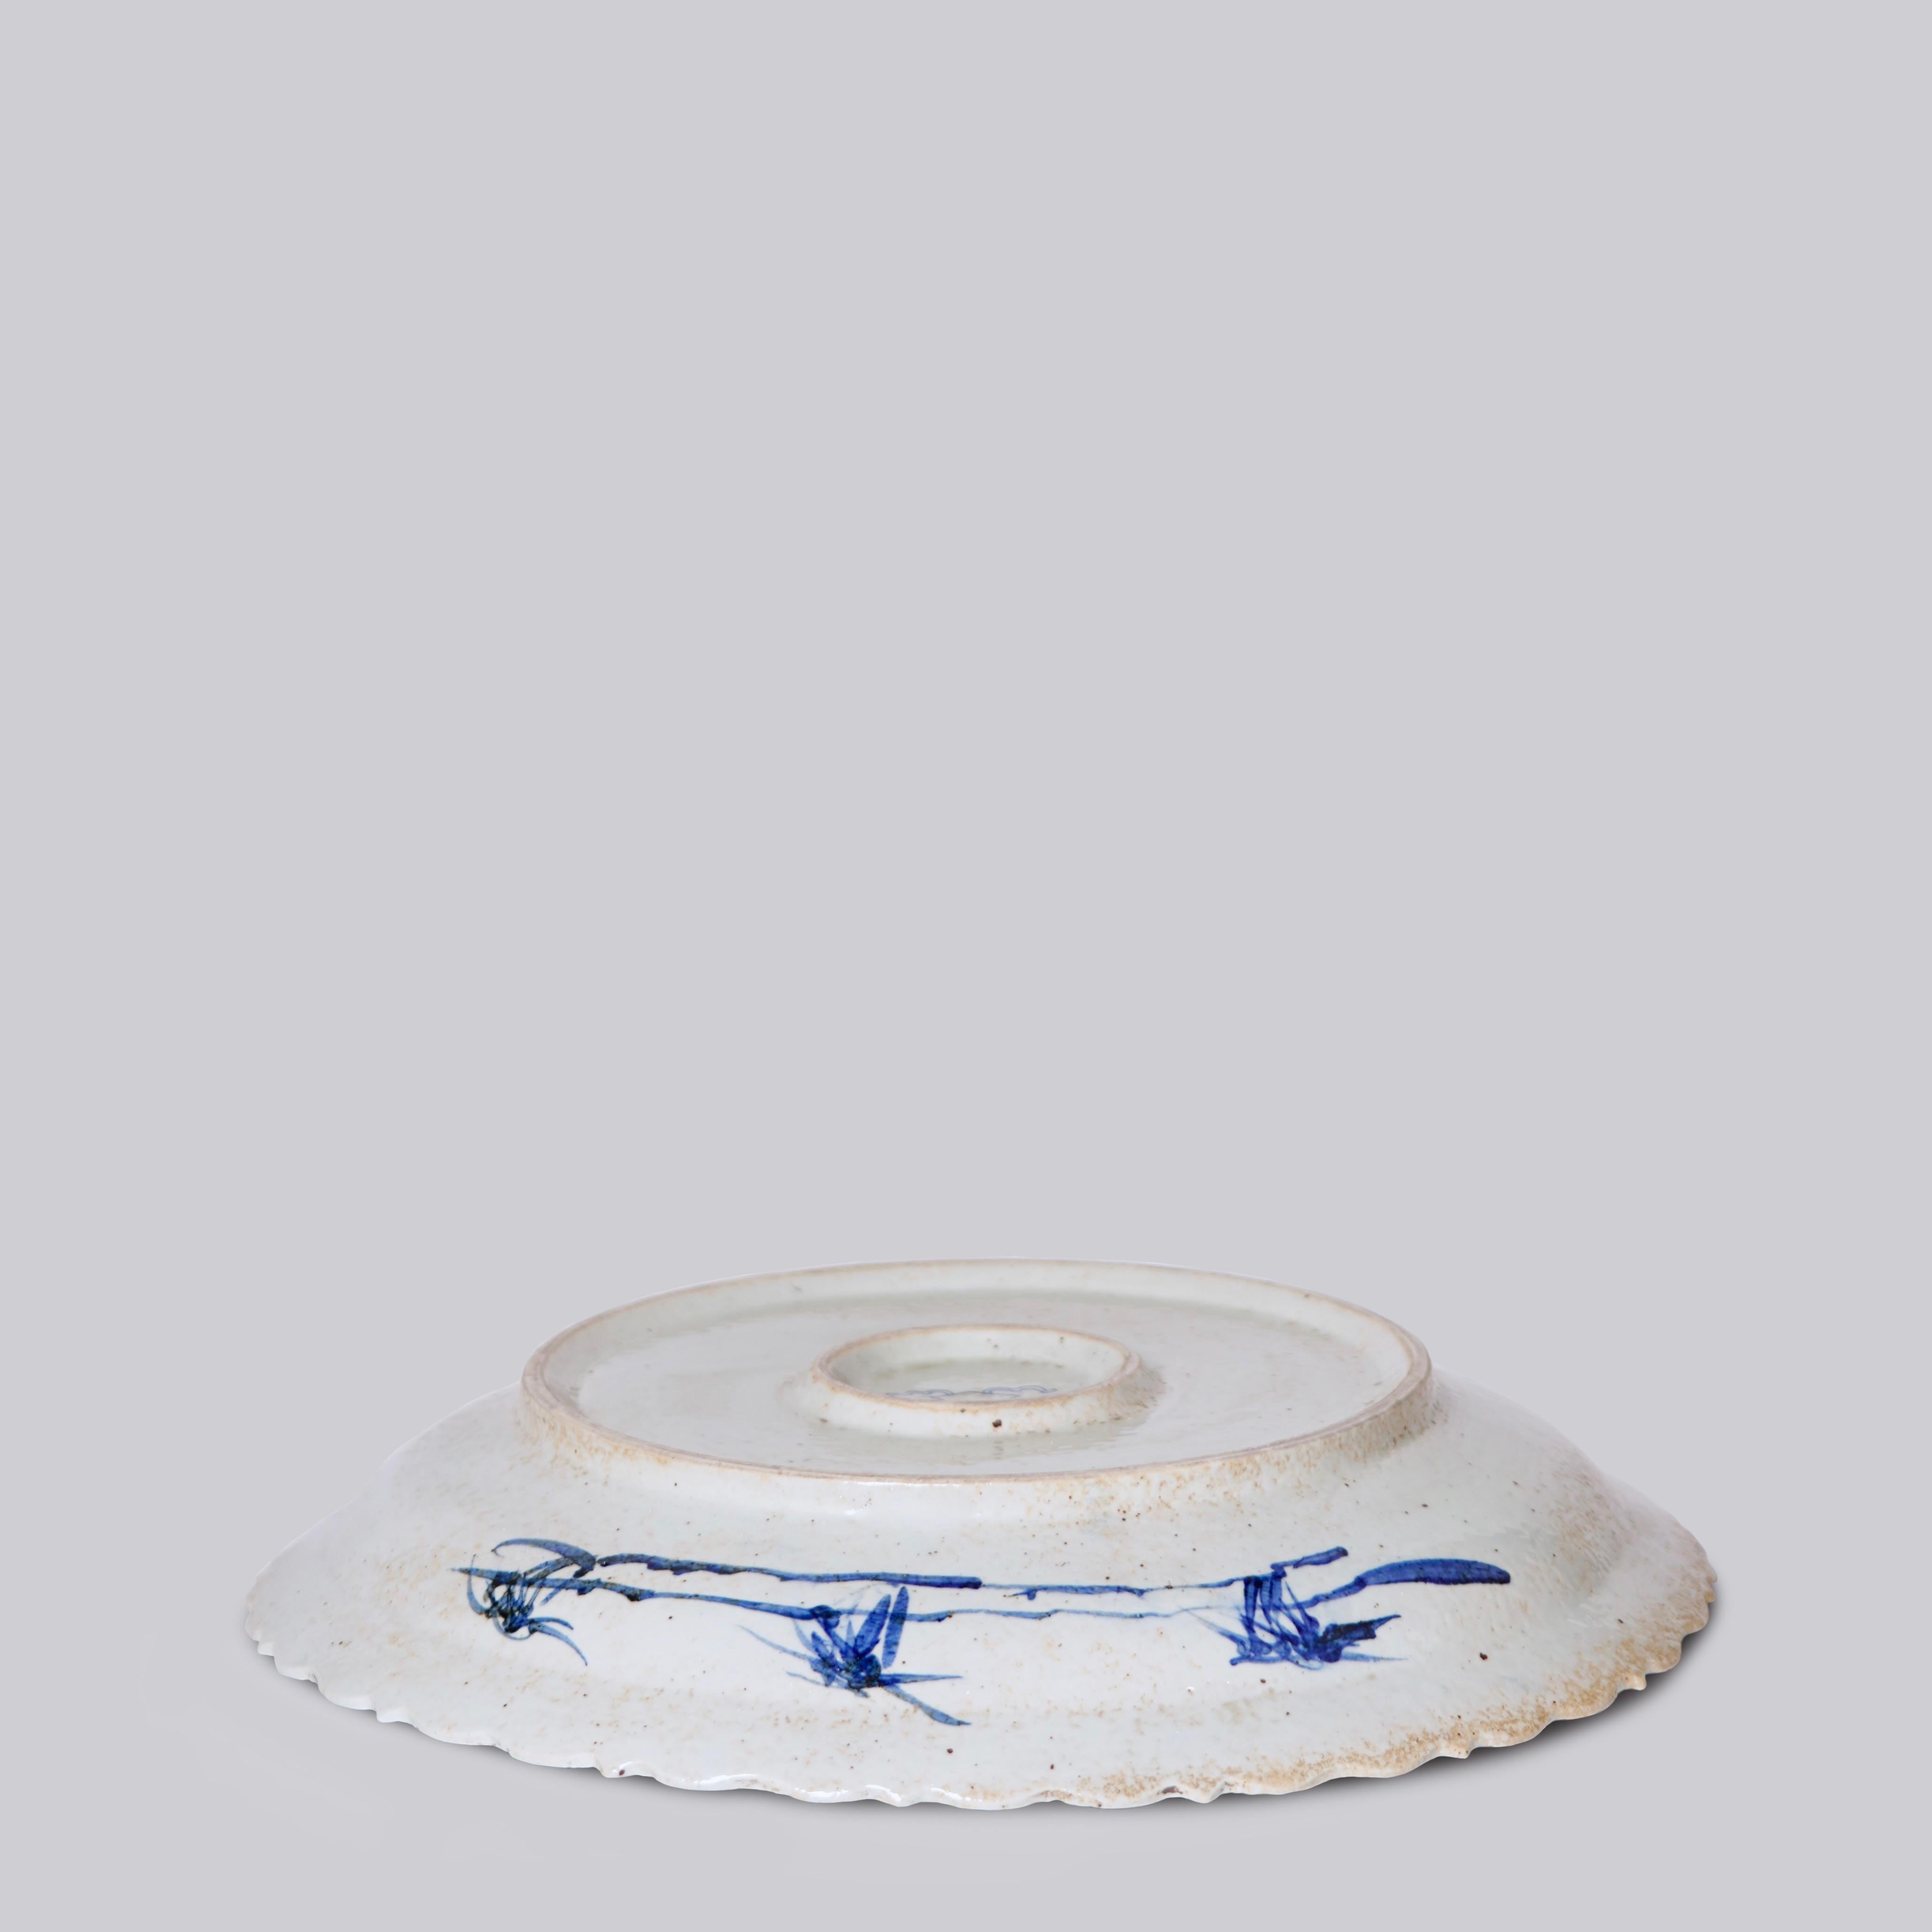 Fired Blue and White Porcelain Platter with Bird and Flower Design and Foliated Rim